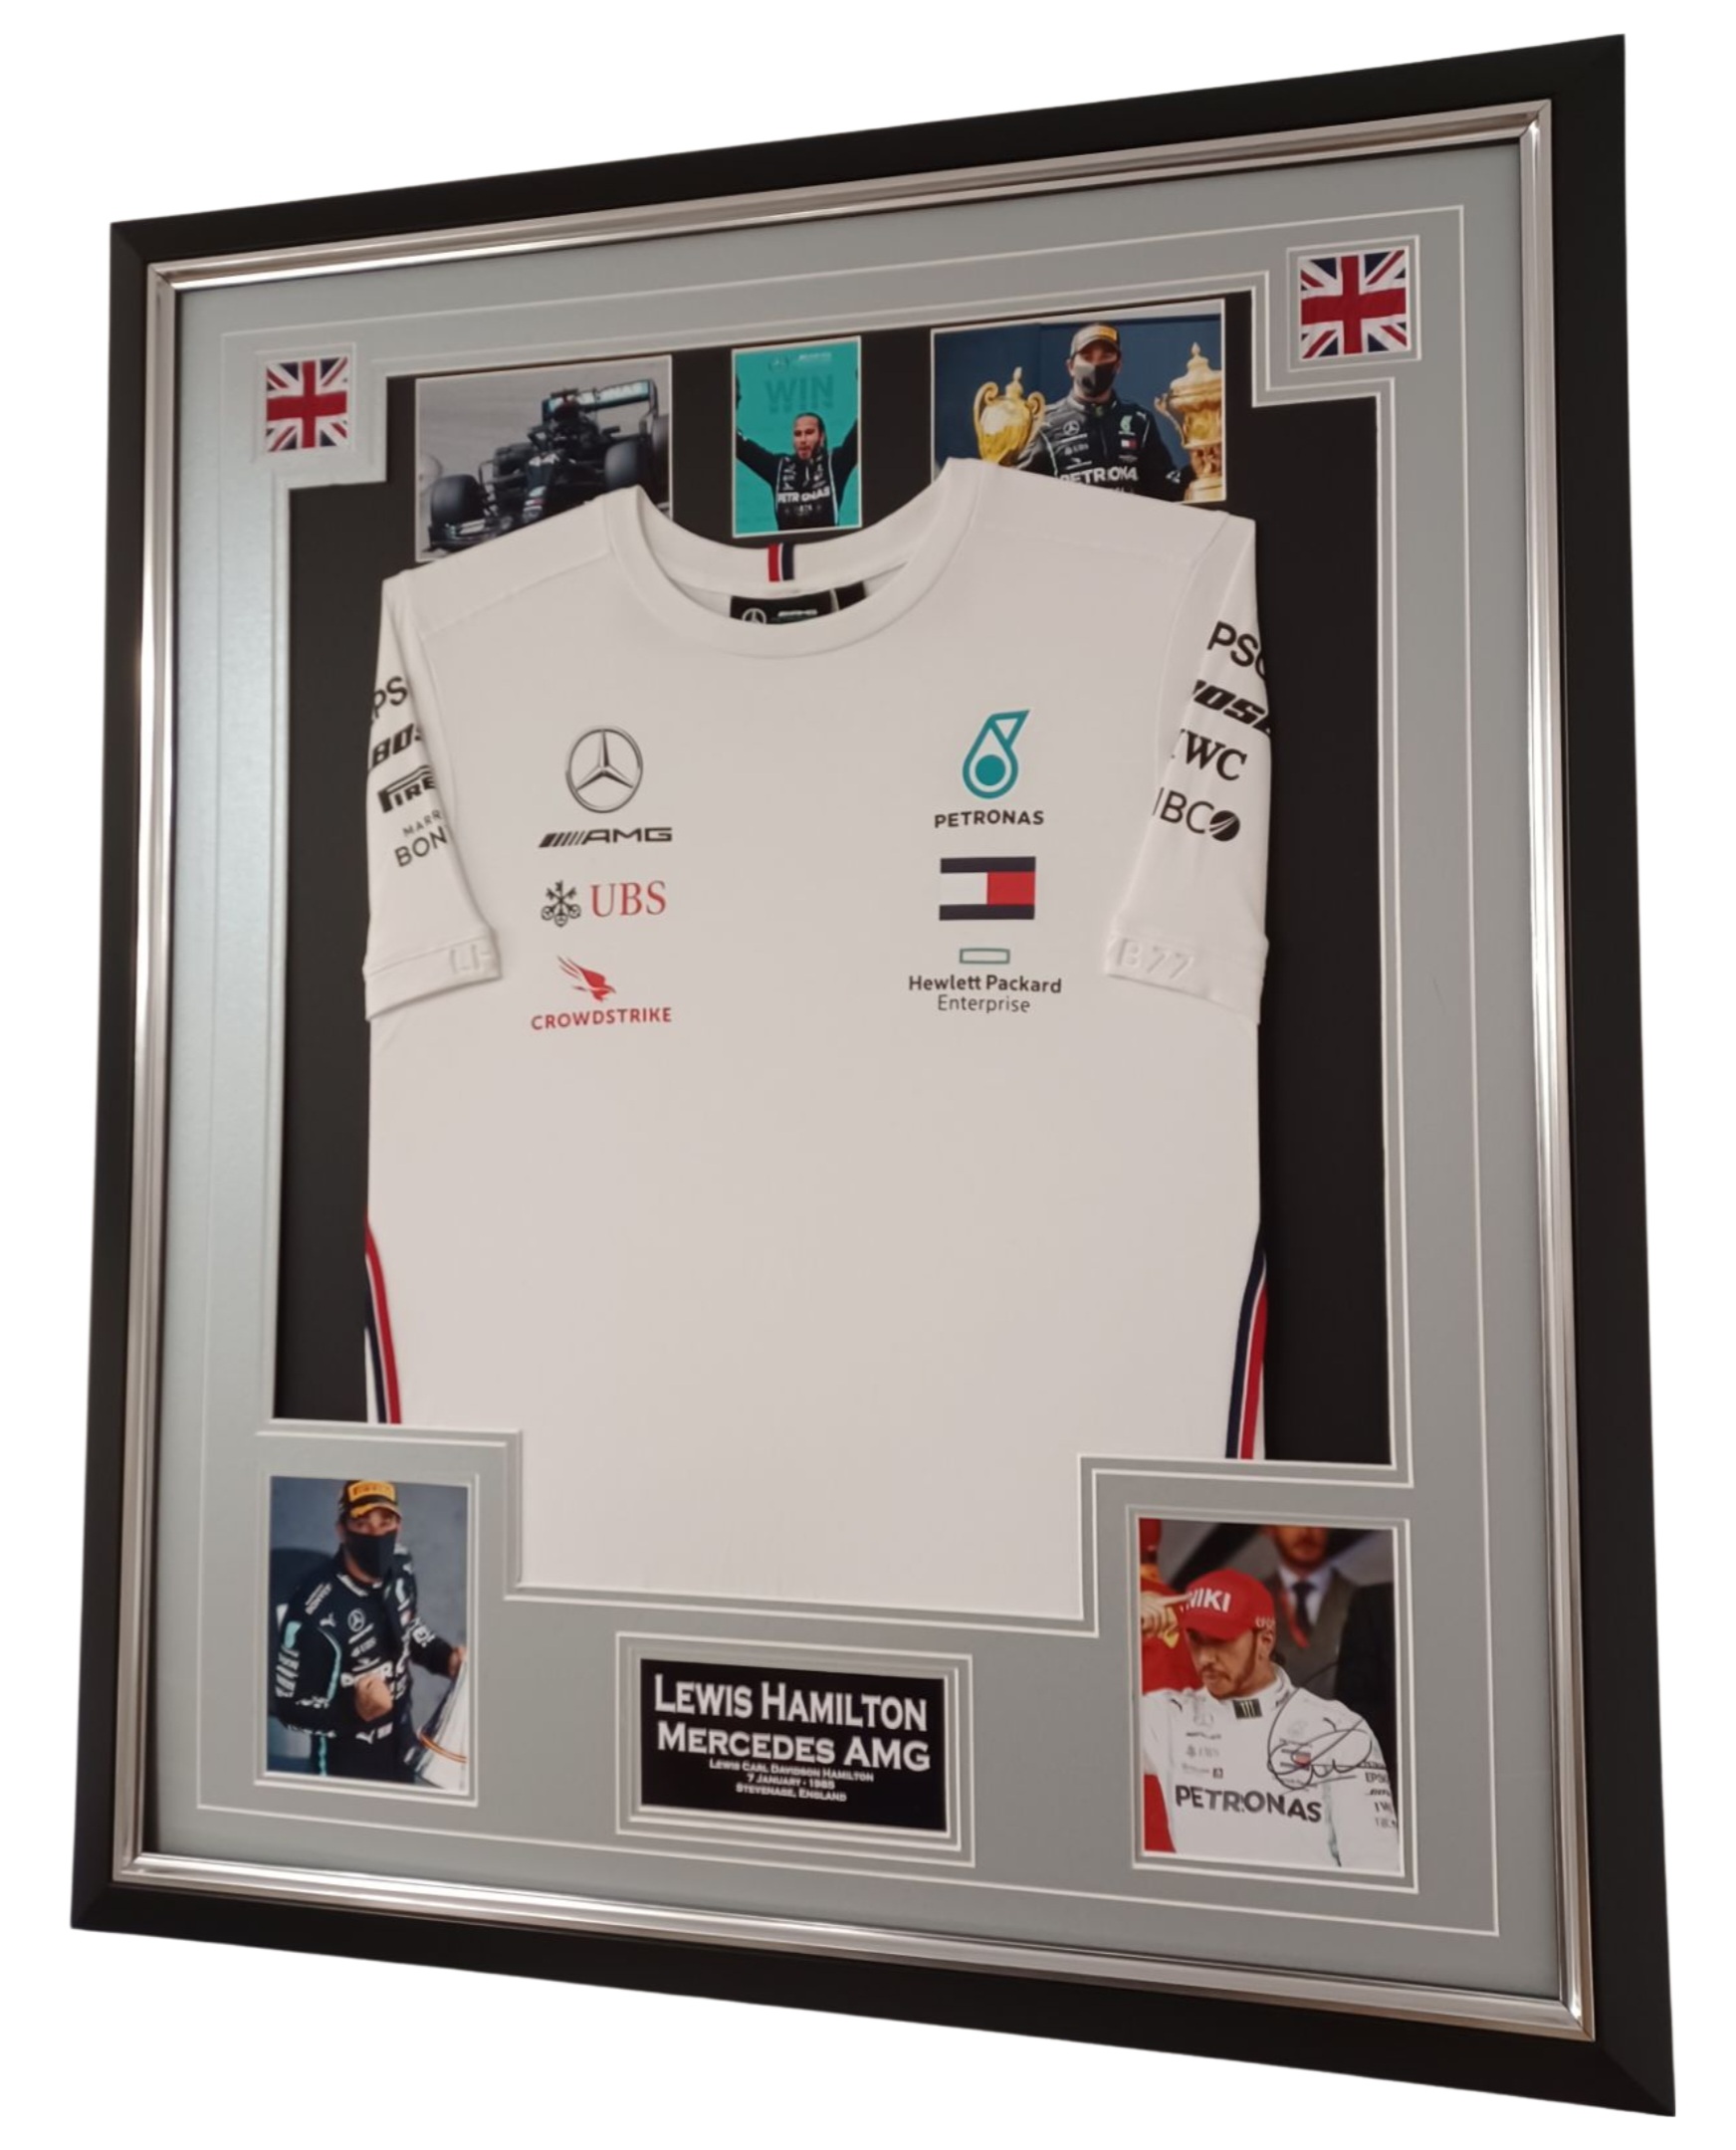 LEWIS HAMILTON SIGNED PHOTO WITH SHIRT (MERCEDES F1)